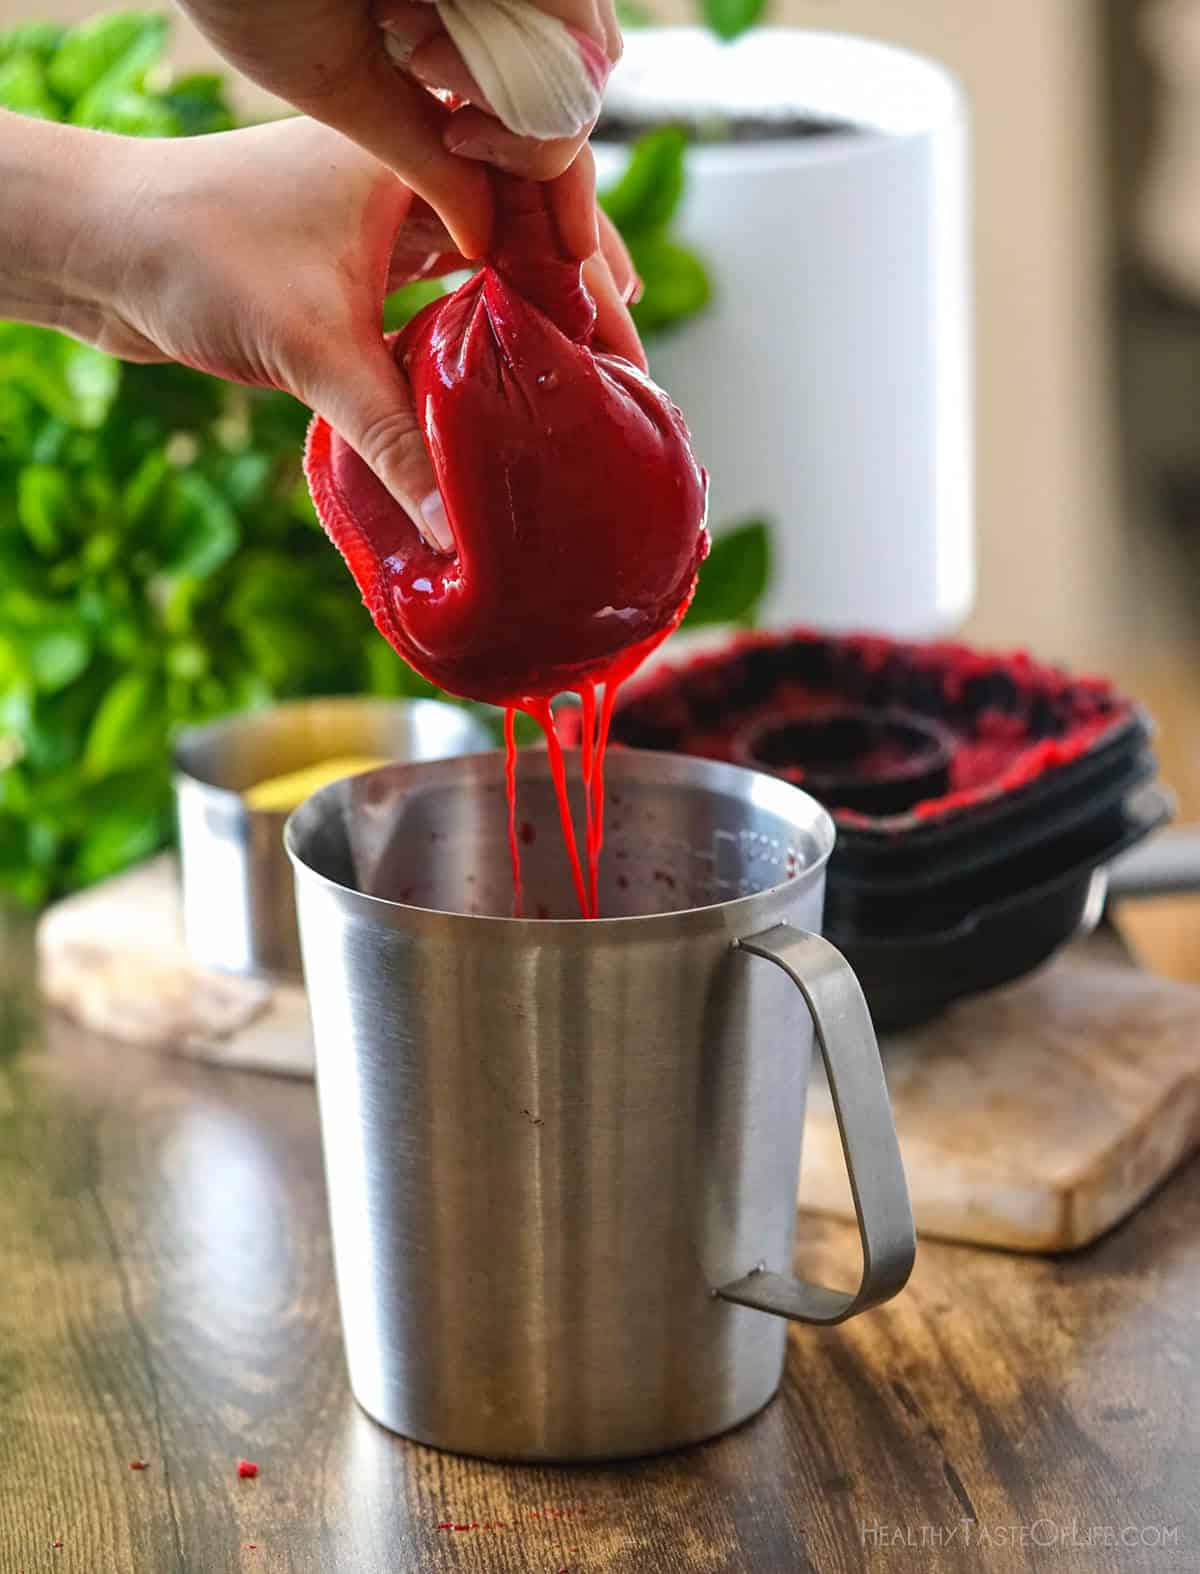 Squeezing beet juice through a nut milk bag into a container.